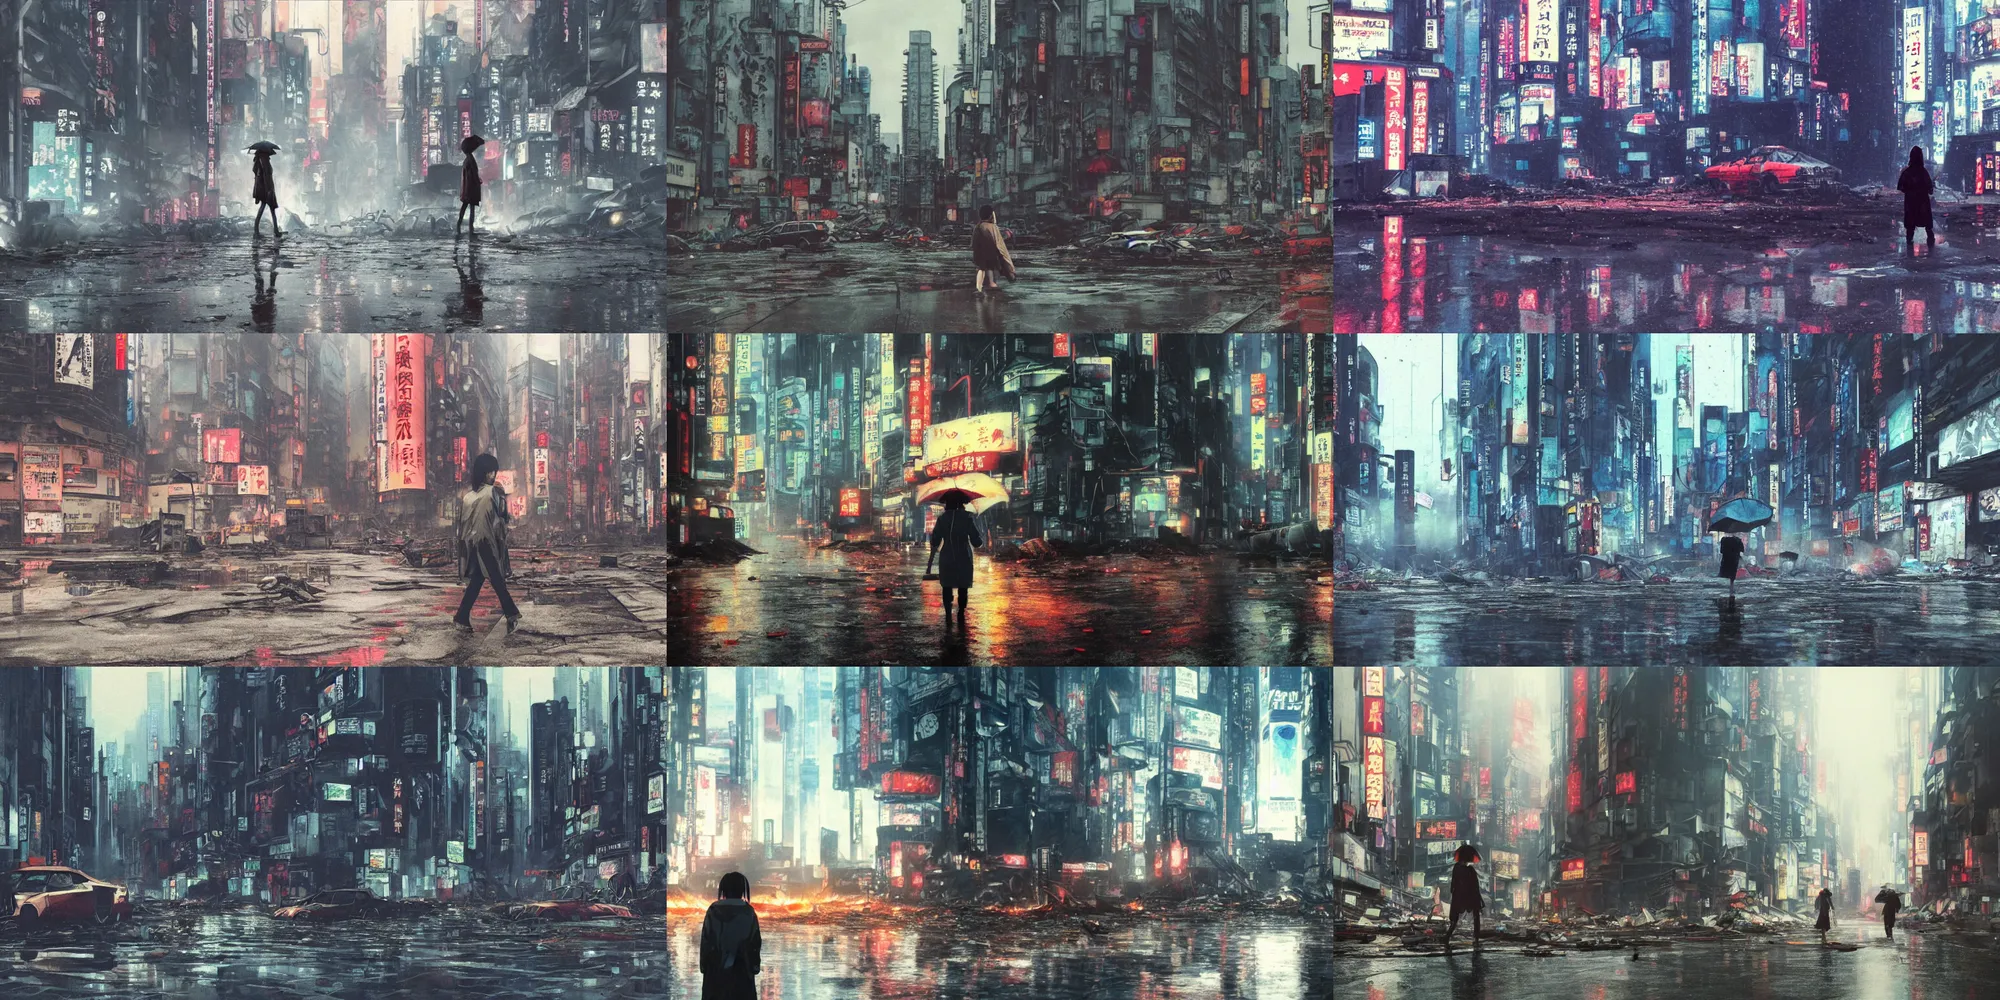 Prompt: incredible wide screenshot, ultrawide, simple water color, paper texture, katsuhiro otomo ghost in the shell movie scene, backlit shot girl in parka, wet dark road, parasol in deserted junk pile shinjuku, broke machines, bold graffiti, destruction, reflection puddles, fog!, buildings on fire!!!!!!!